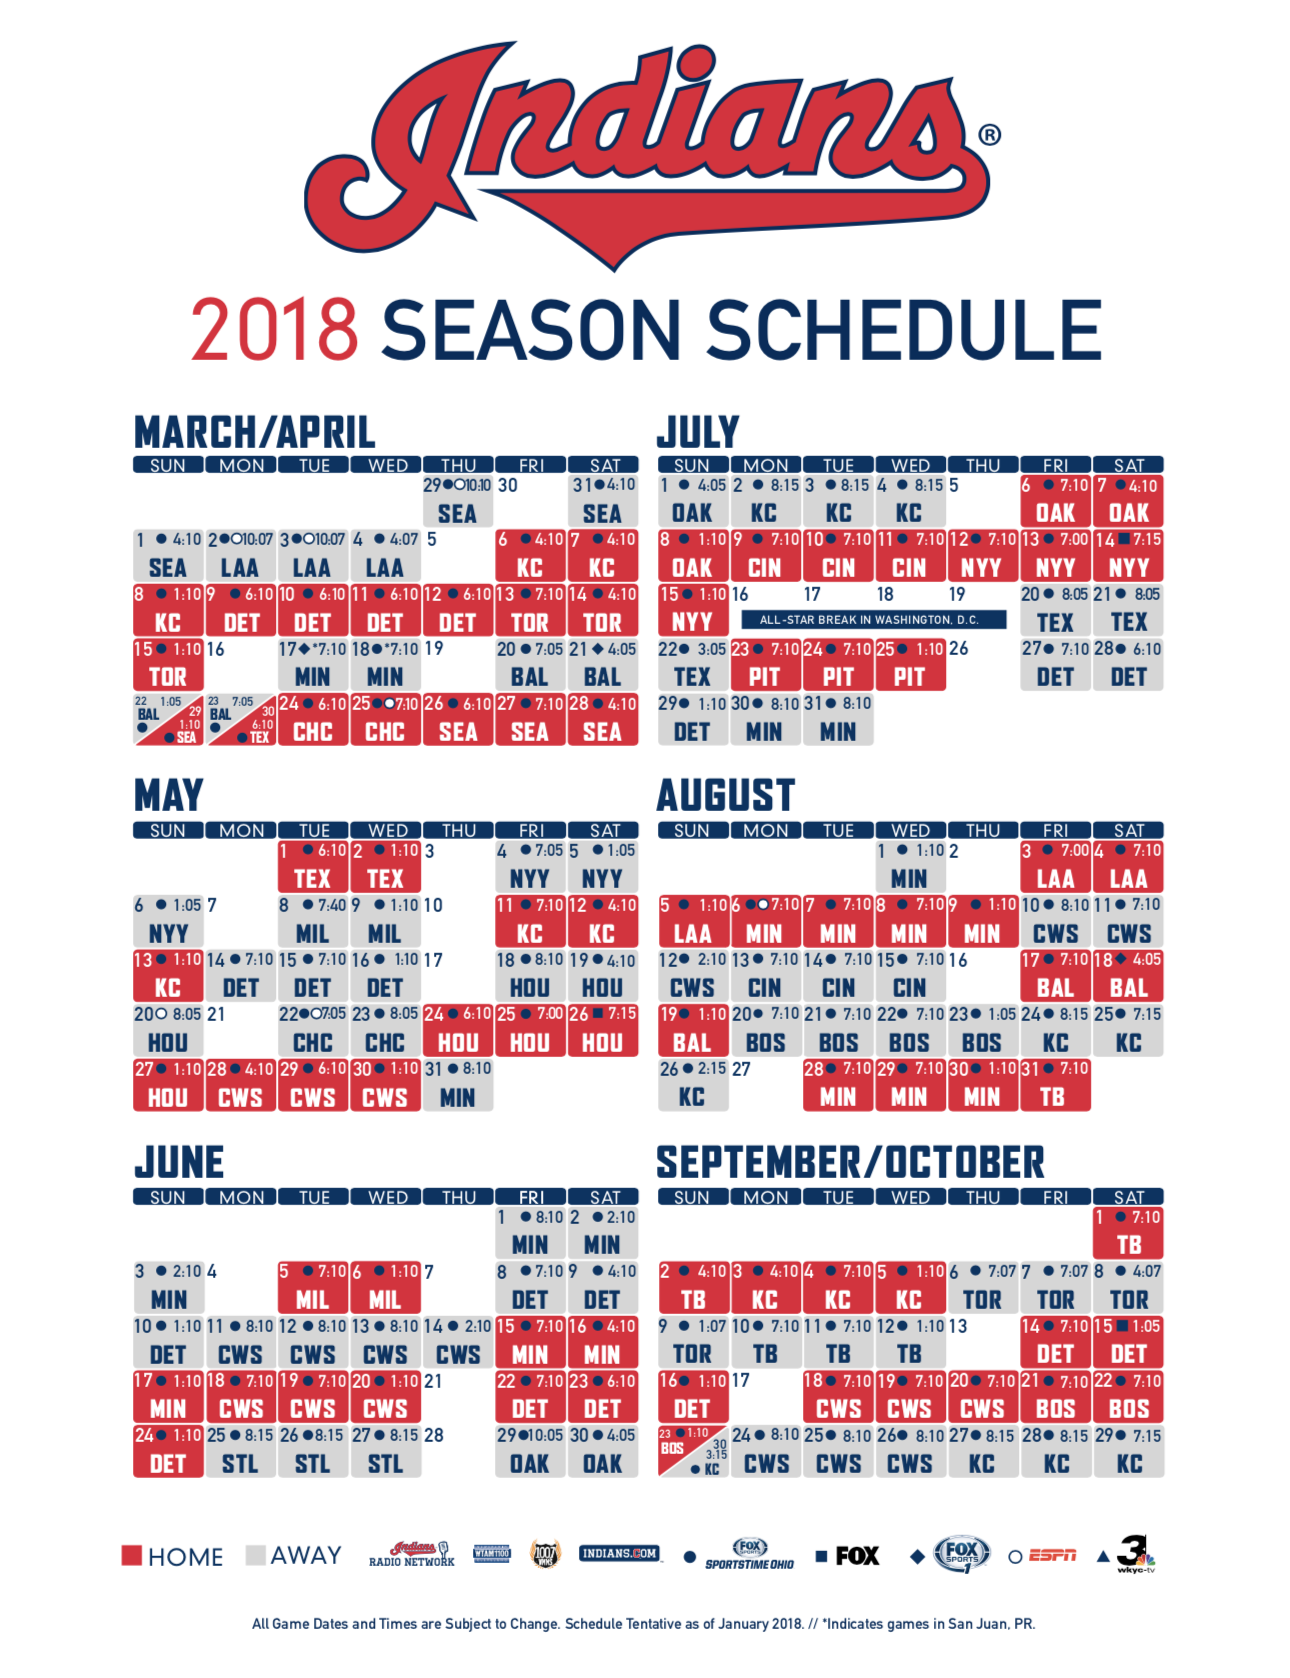 Cleveland Indians release 2018 schedule game times and broadcast schedule